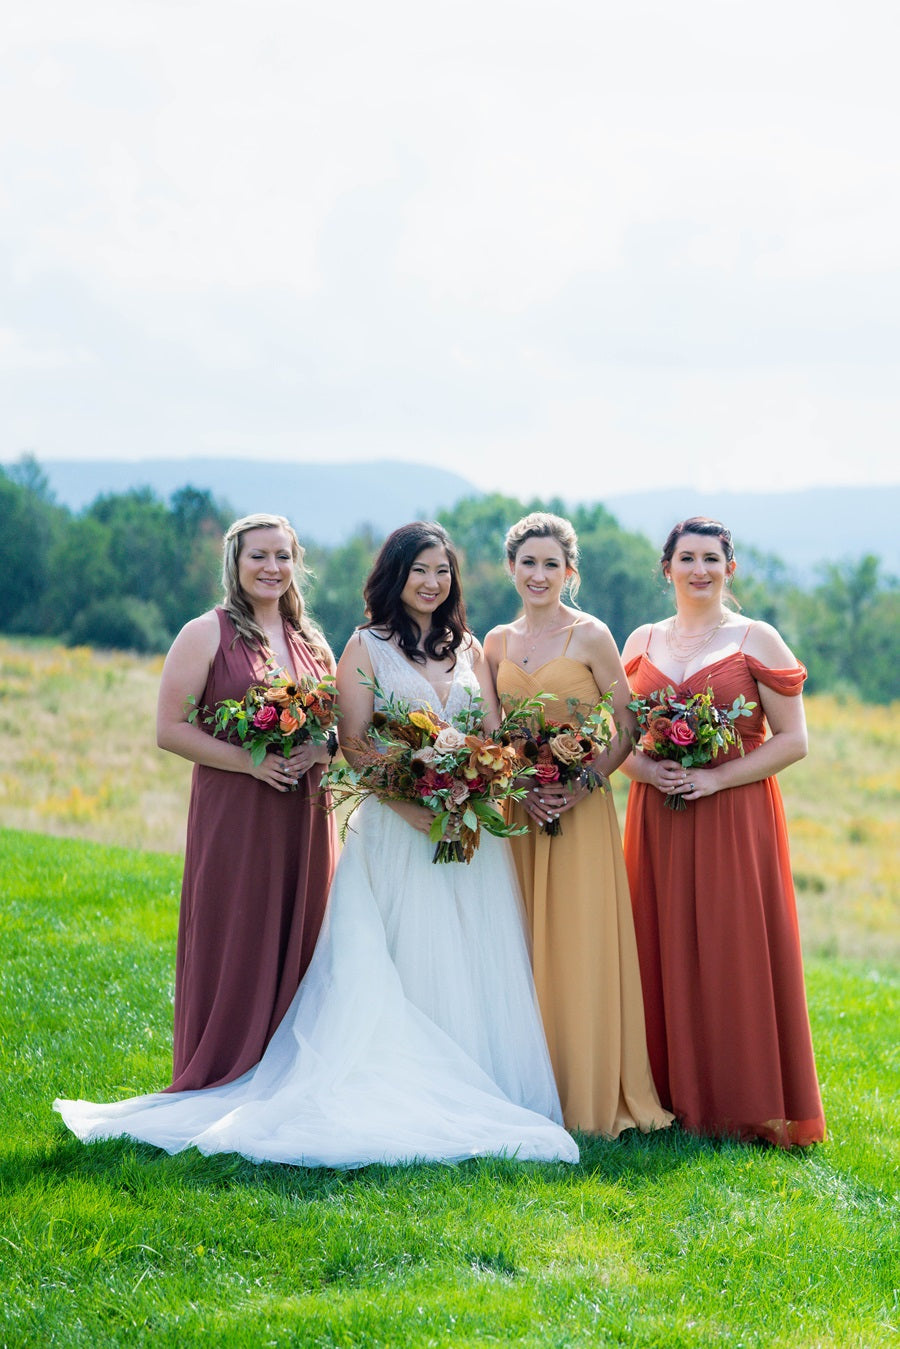 Bride and bridesmaids standing together holding their bouquets. Bride is in white, bridesmaids are in various colors. From left to right, burgundy red, yellow, and an orange/red.